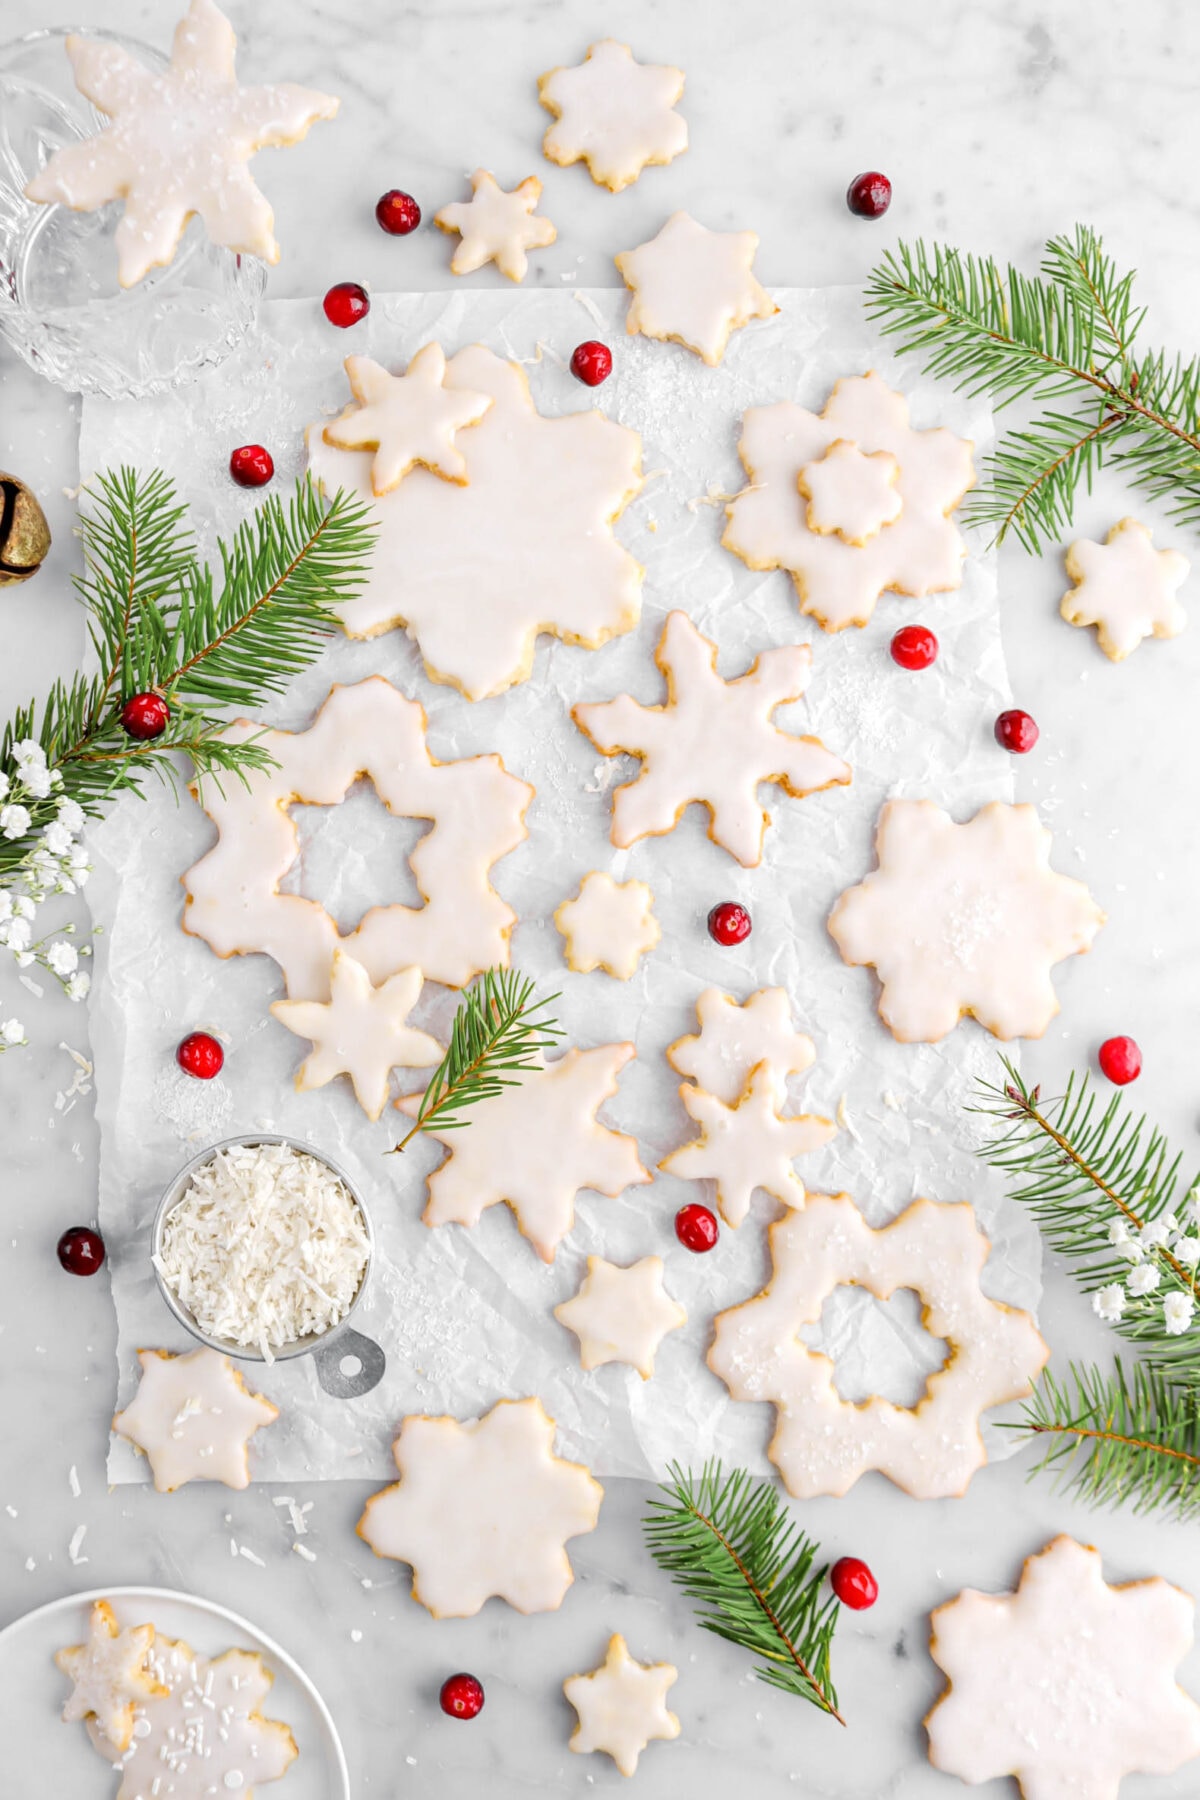 snowflake cookies on parchment paper with greenery around, cranberries, and measuring cup of shredded coconut with a plate of cookies beside.